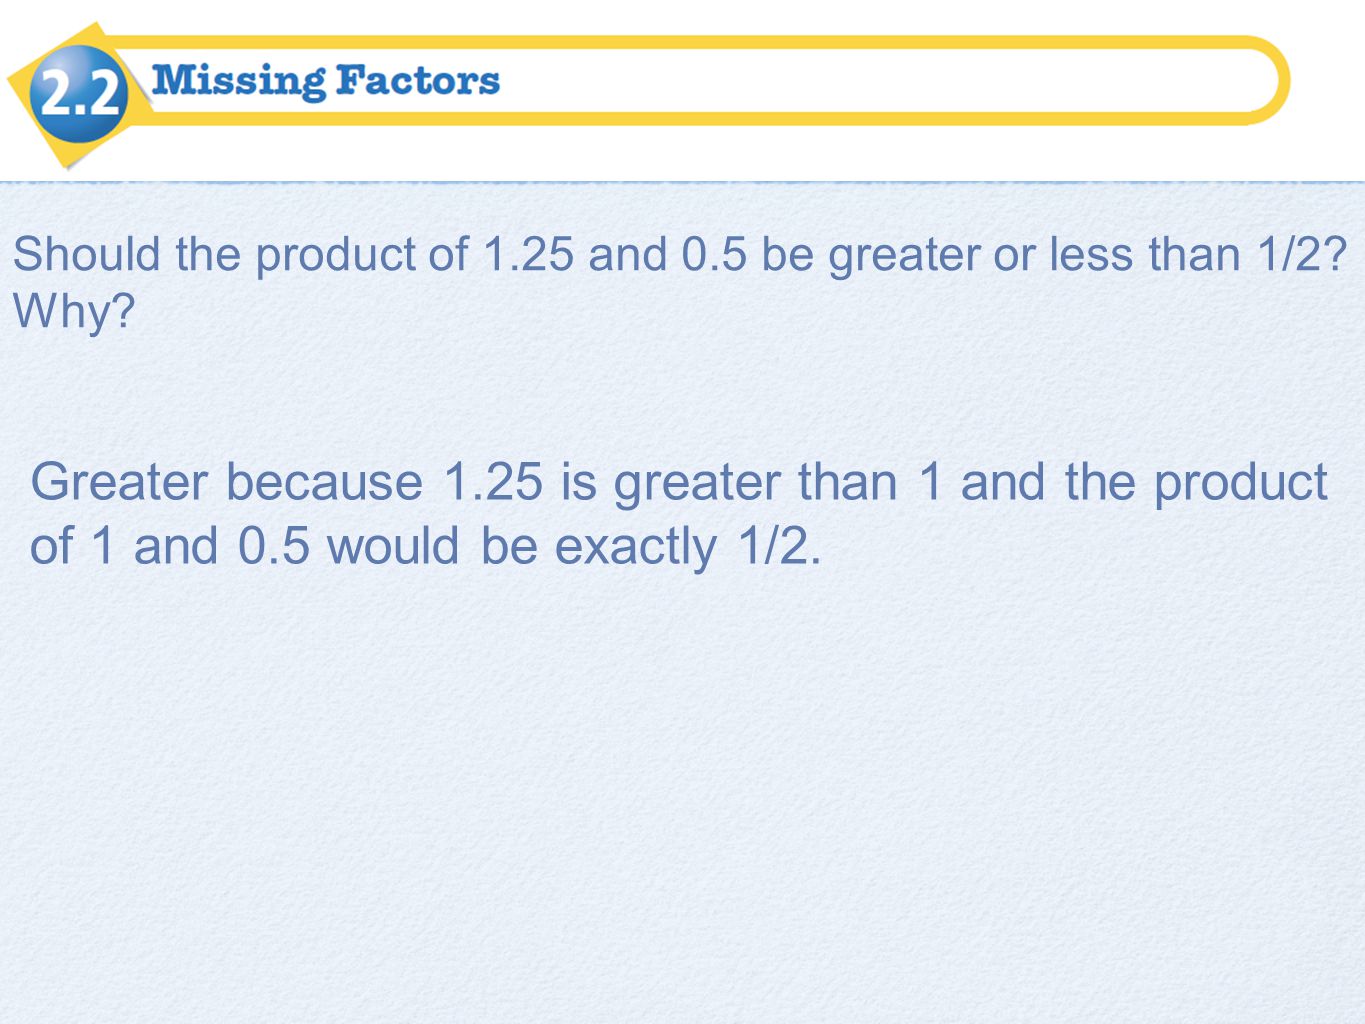 Should the product of 1.25 and 0.5 be greater or less than 1/2 Why